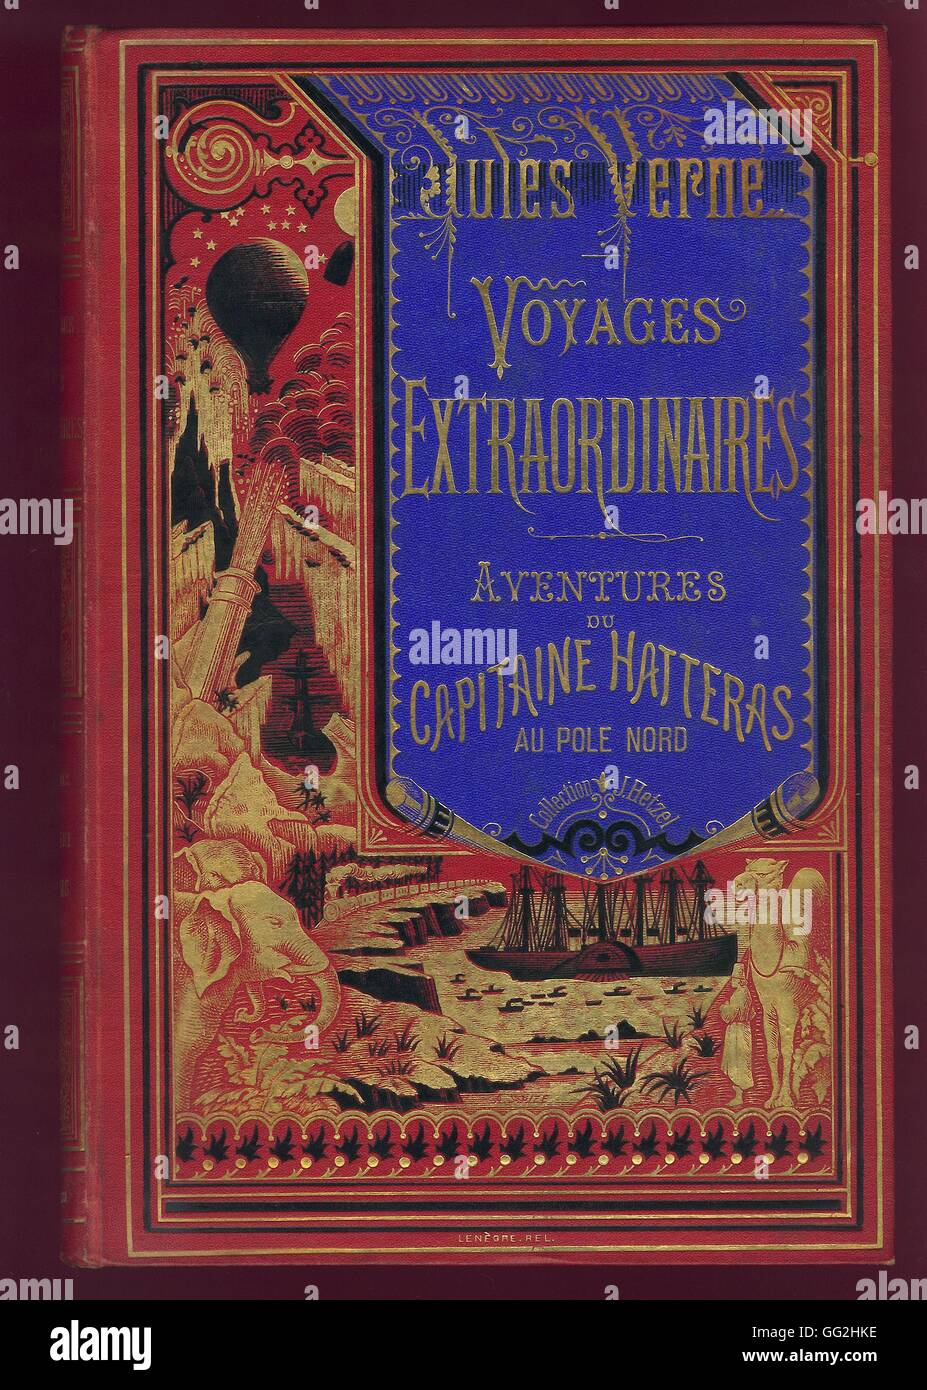 Les Voyages extraordinaires, Jules Verne Published as a serial novel in 1866 Collection Hetzel Stock Photo